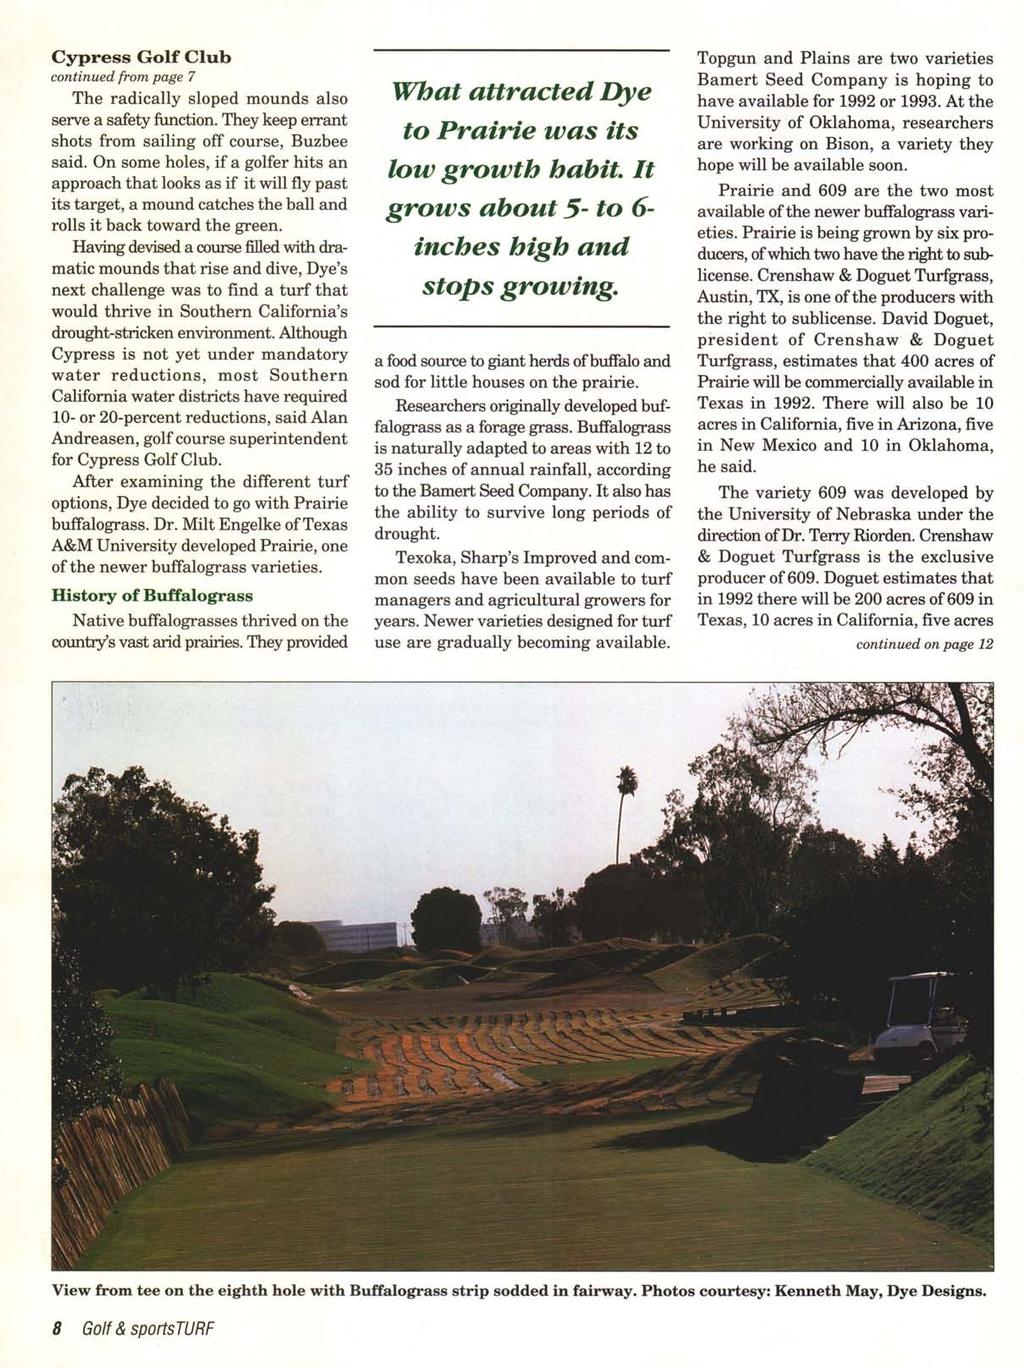 Cypress Golf Club continued from page 7 The radically sloped mounds also serve a safety function. They keep errant shots from sailing off course, Buzbee said.